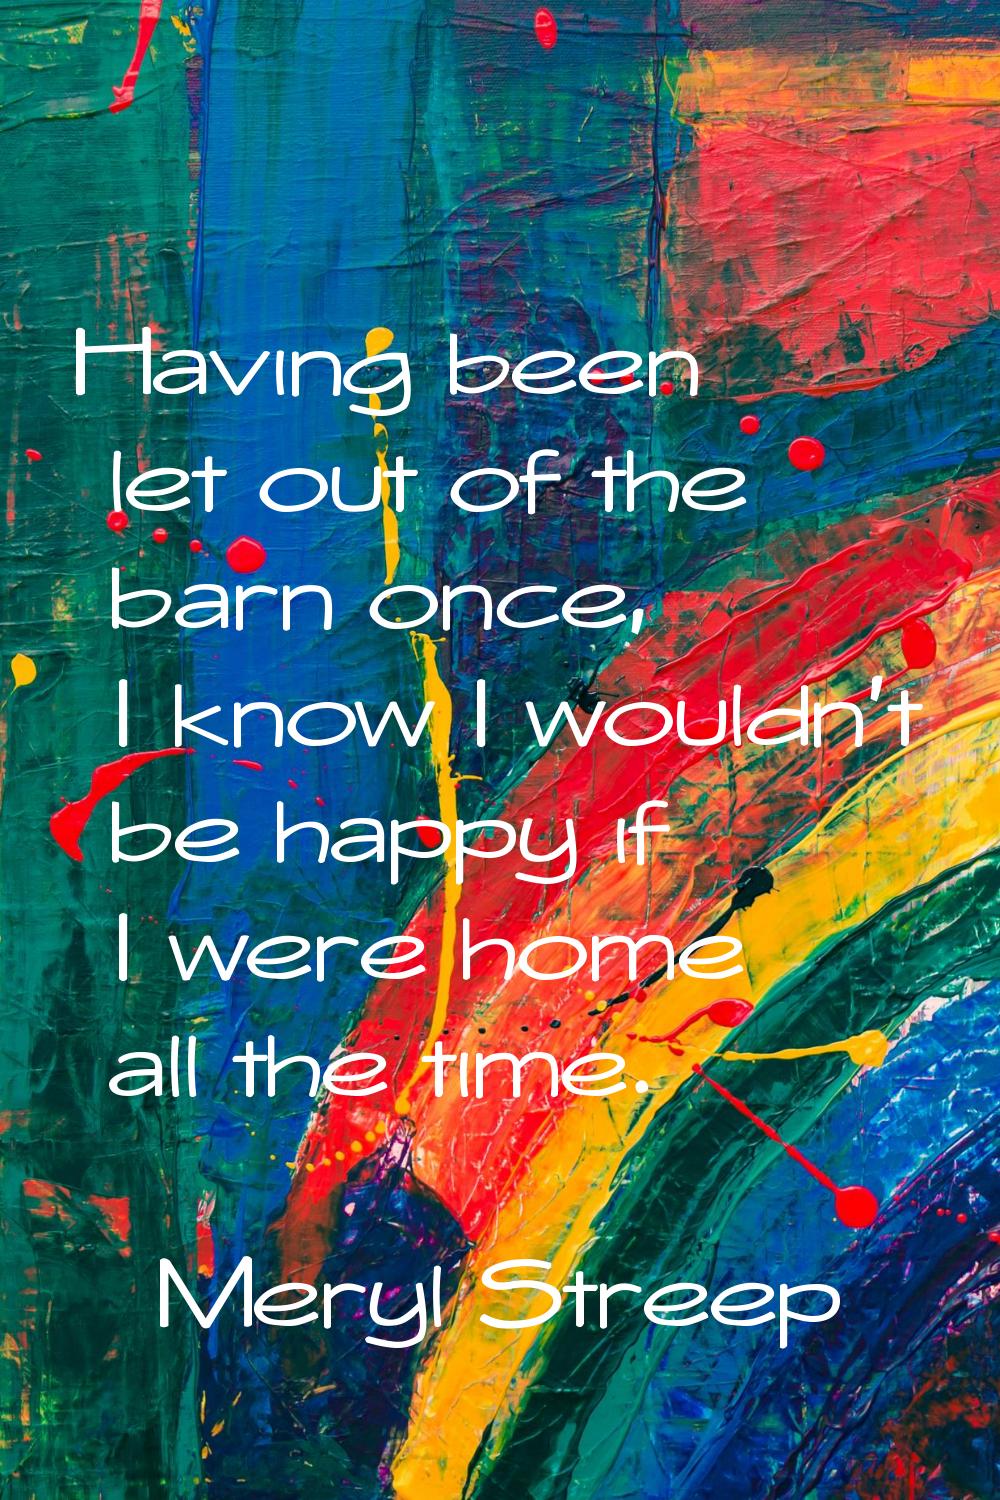 Having been let out of the barn once, I know I wouldn't be happy if I were home all the time.